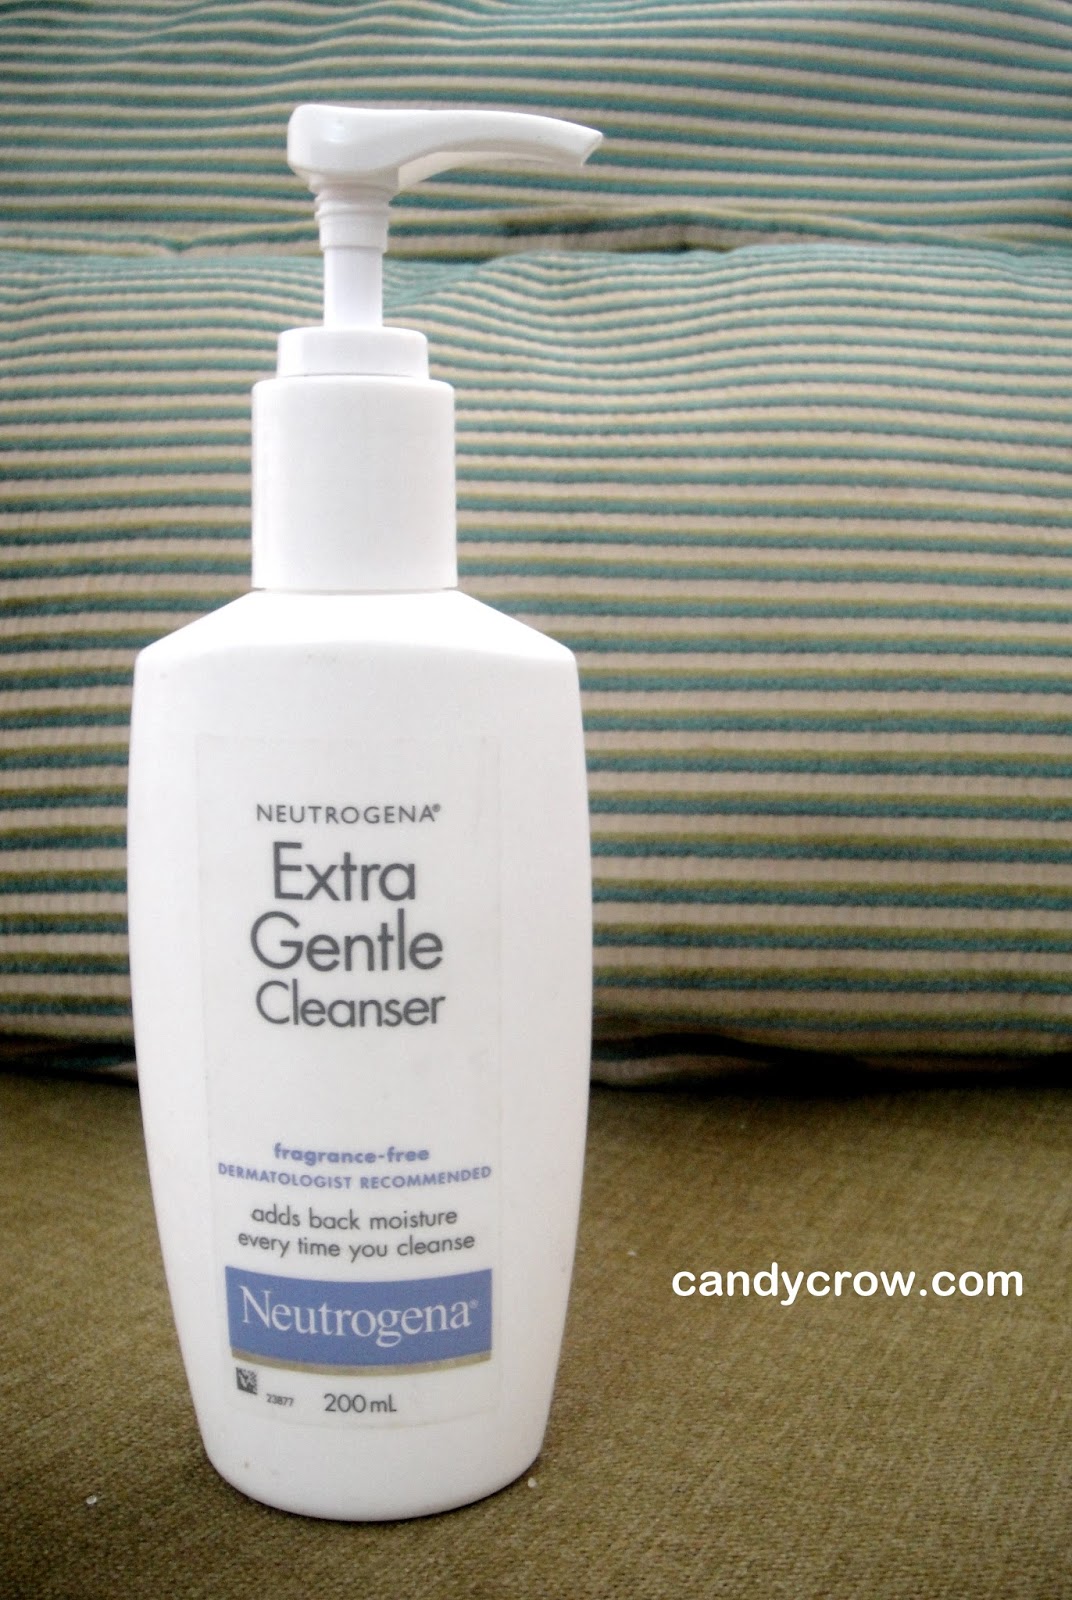 Neutrogena extra gentle cleanser review